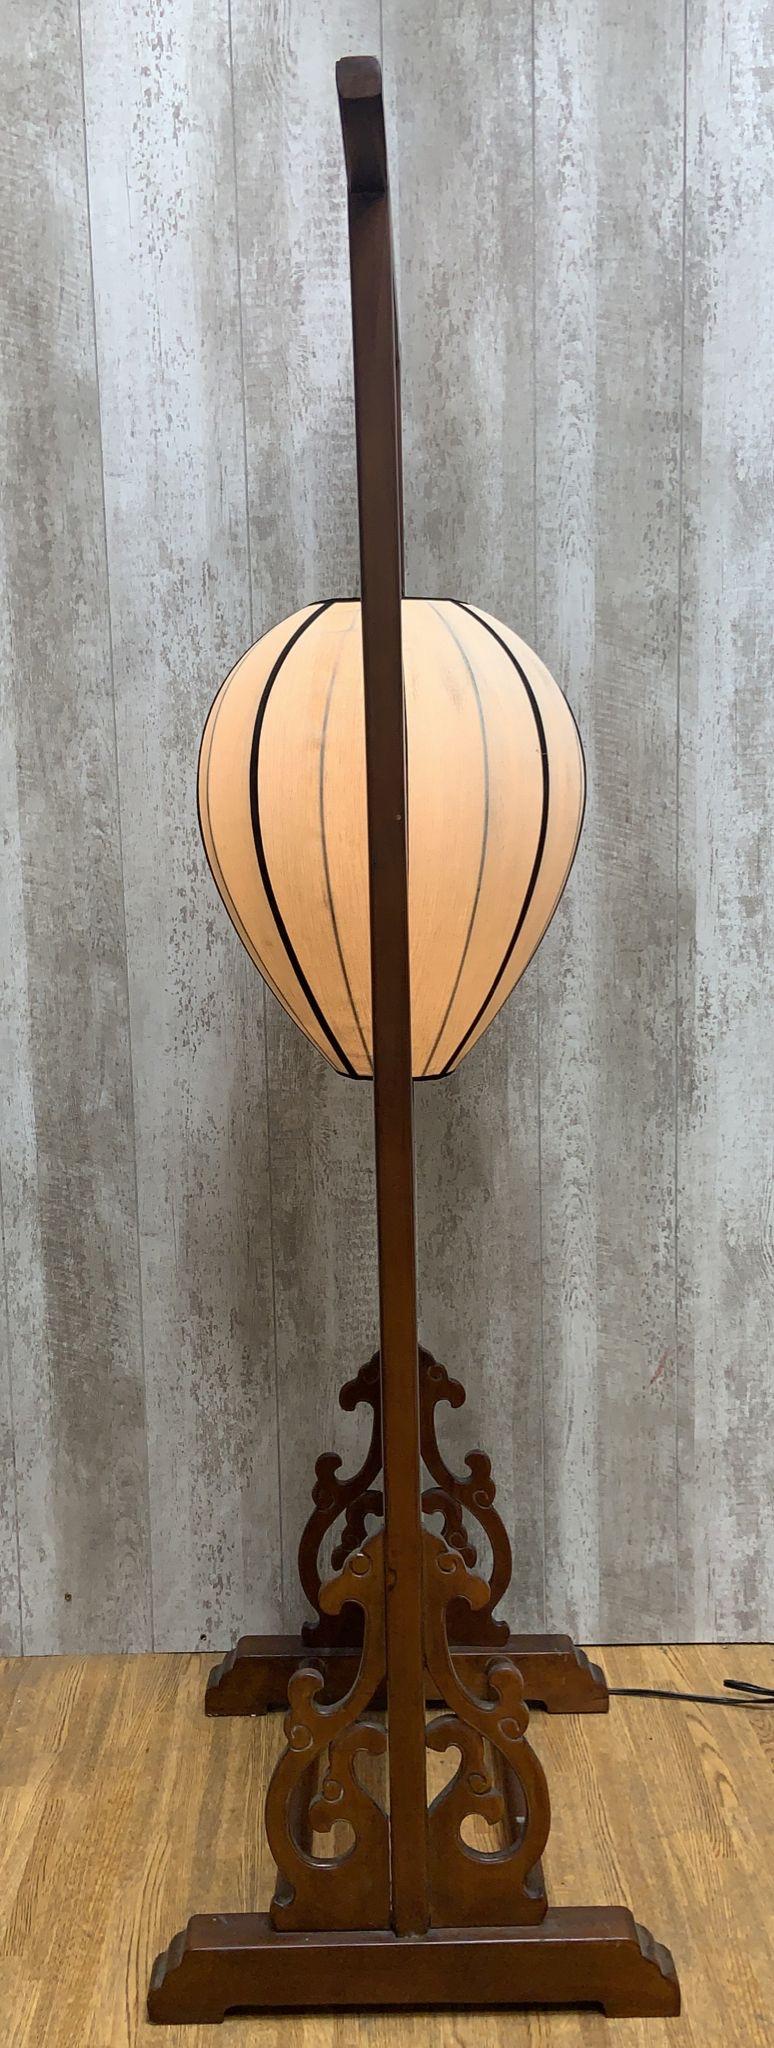 Vintage Shanxi Province Elm Cream Lantern Floor Lamp

This limited edition Vintage Shanxi Province Elm Cream Lantern Floor Lamp is crafted from antique elm that is over a 100 years old. It is stained with natural color and lacquer. It creates an